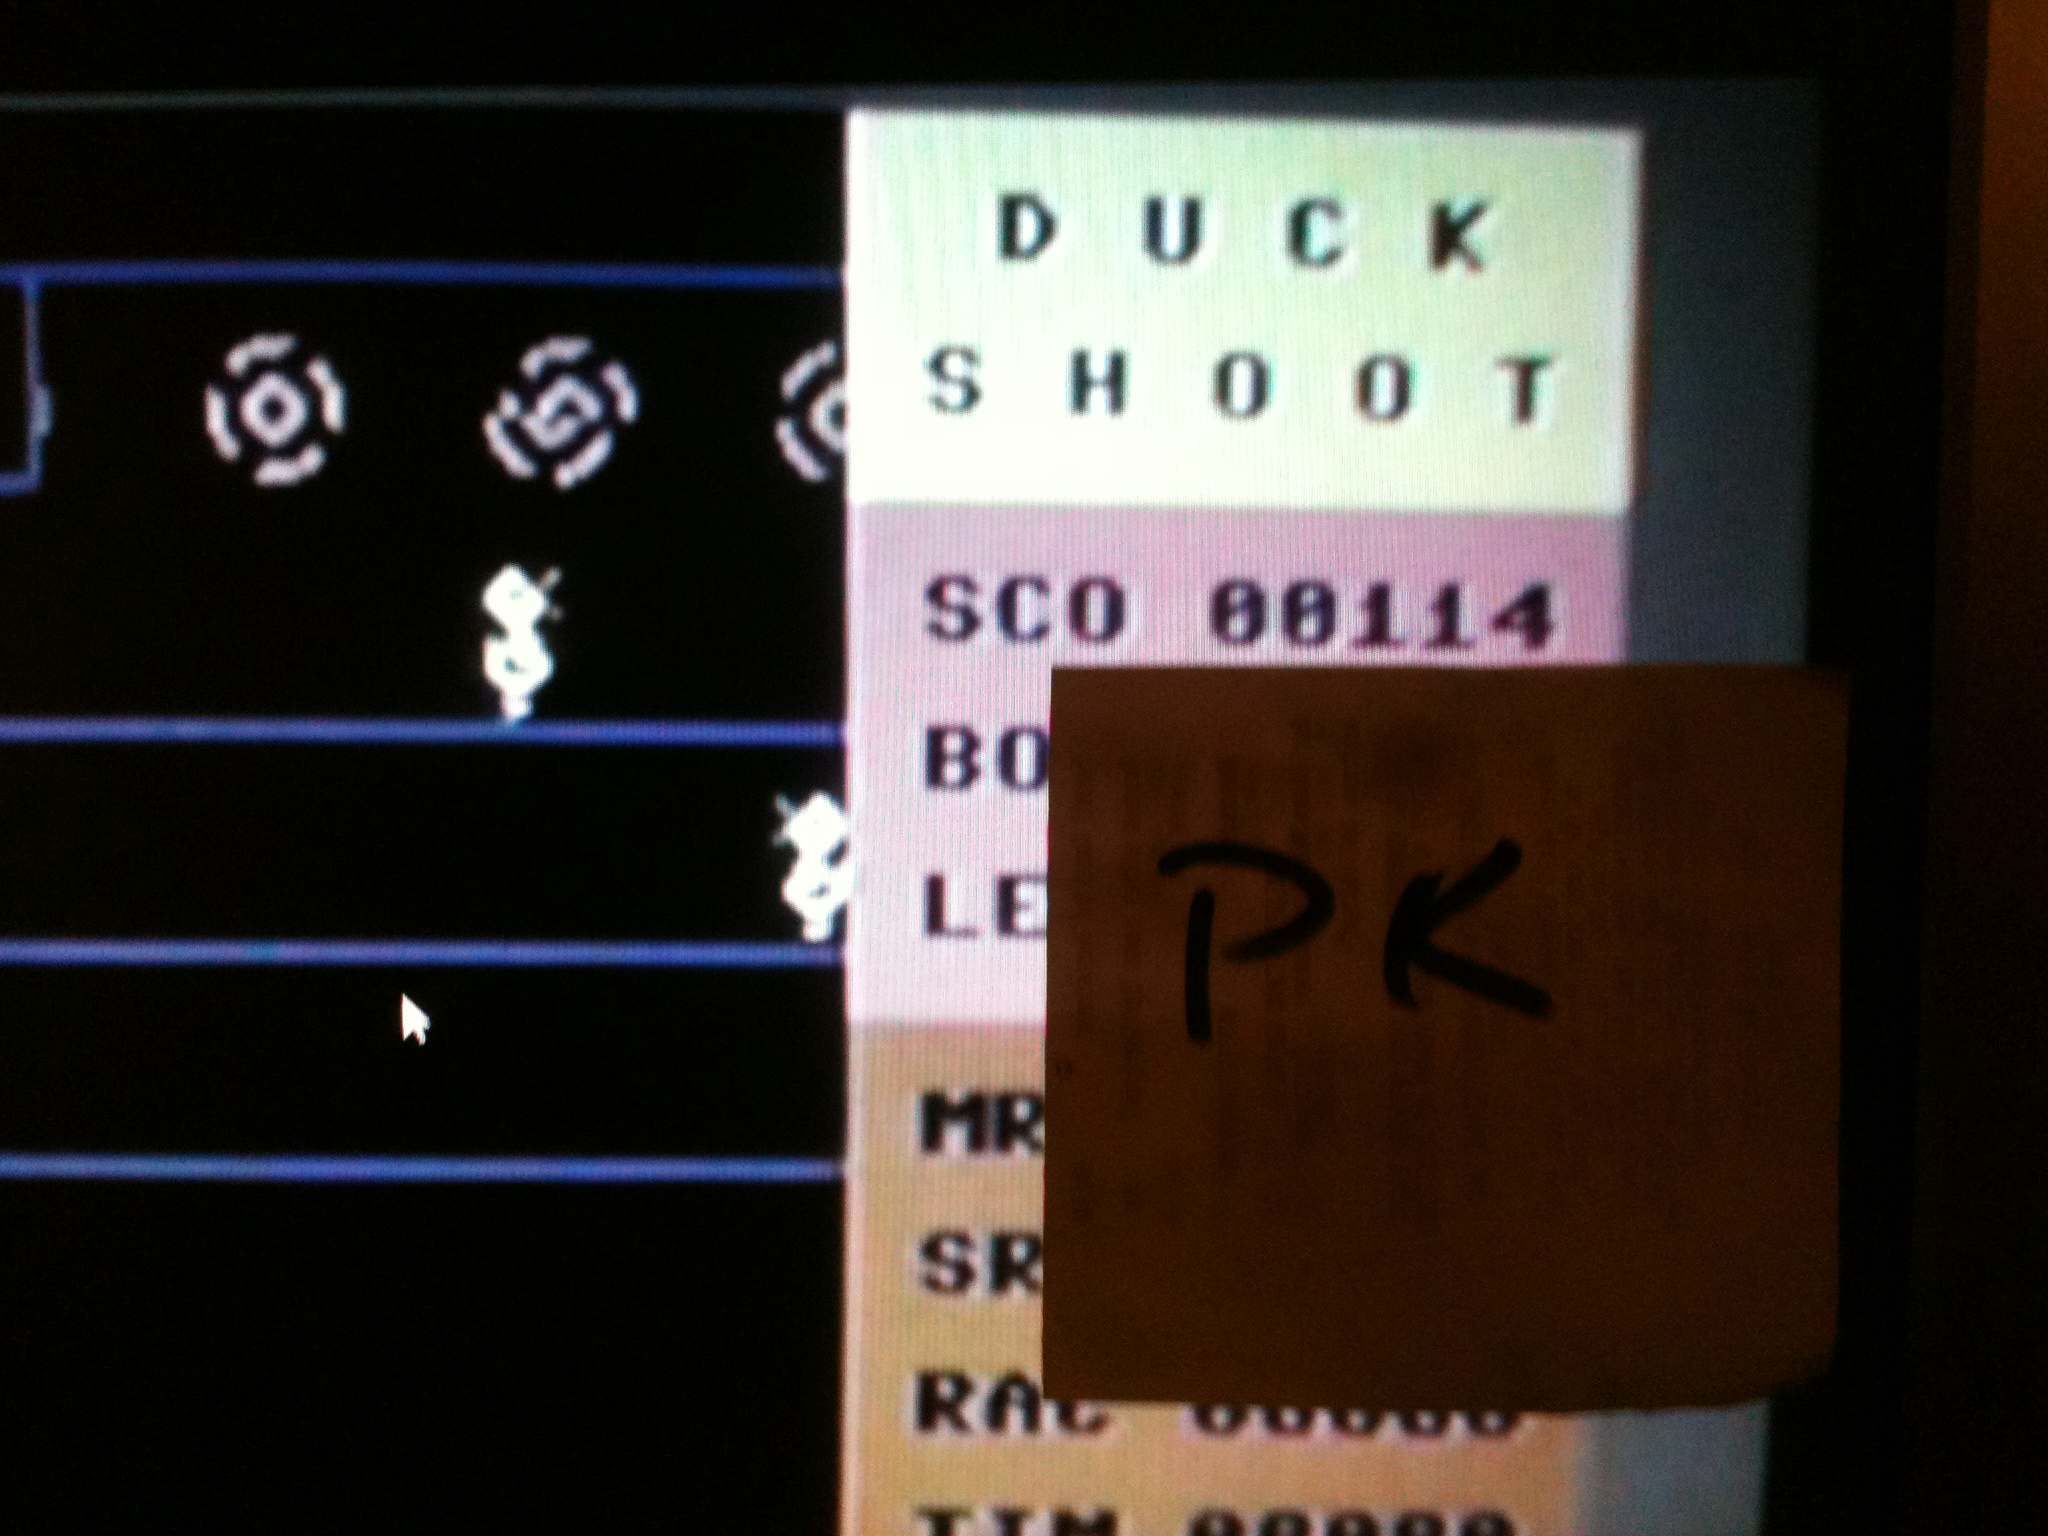 kernzy: Duck Shoot [Mastertronic] (Commodore 64 Emulated) 114 points on 2015-09-25 20:02:39